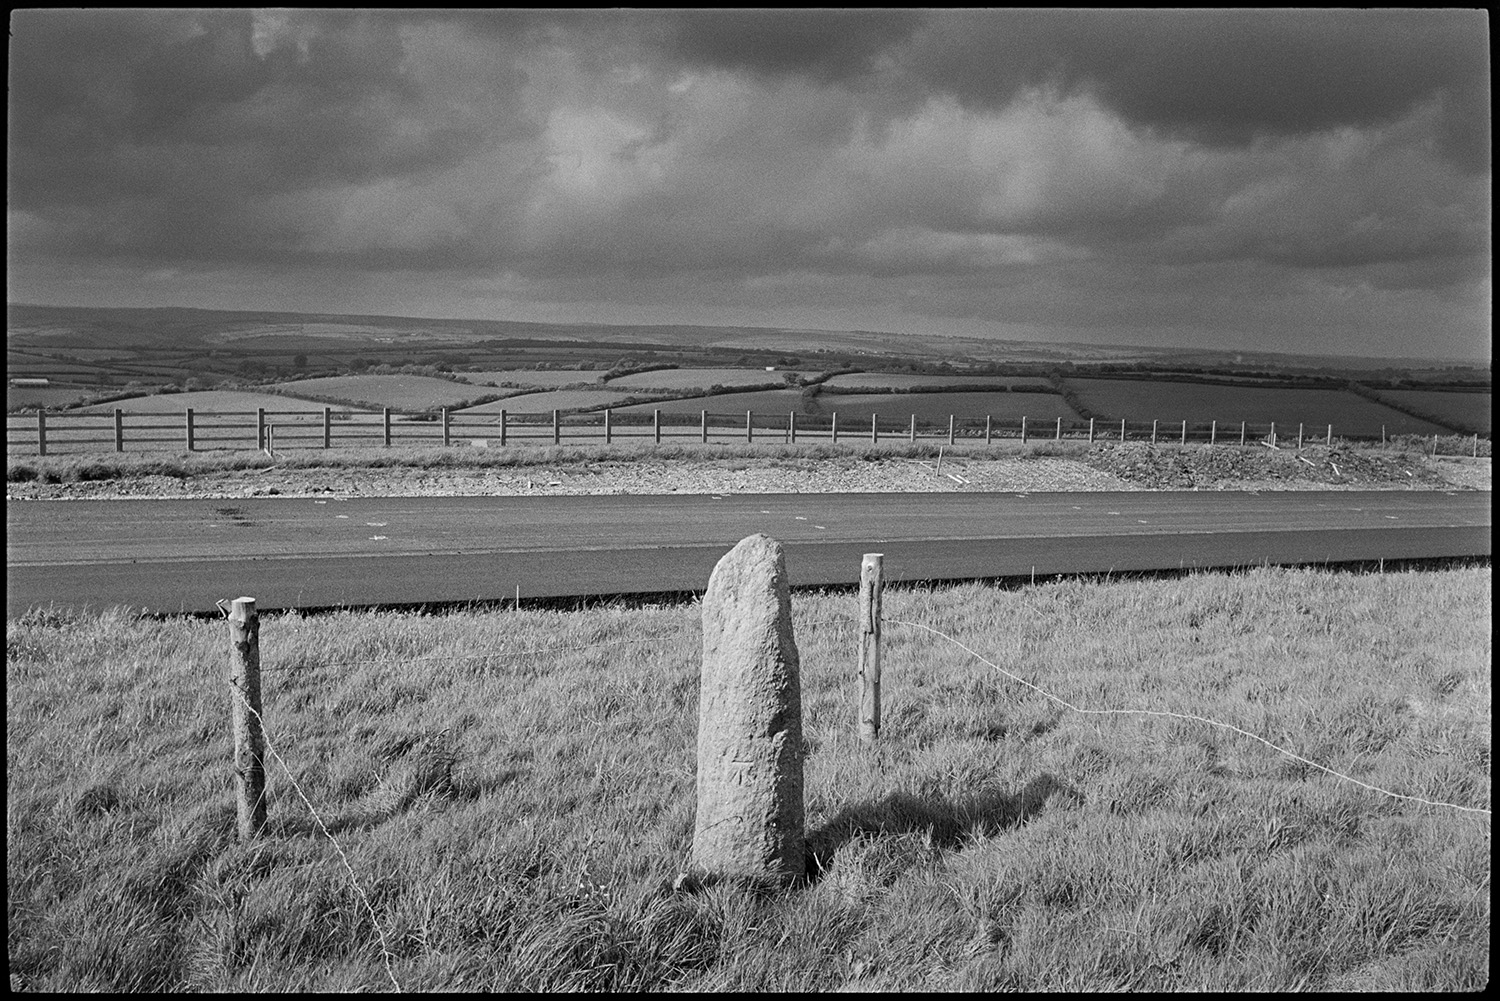 Standing stone beside new road, it was moved before the road was laid down, passing tanker.
[An old standing stone, fenced off by posts and barbed wire, alongside the new North Devon link road near Rackenford. There is a wooden fence and rural landscape of fields and hedgerows in the background, with a stormy sky above.]